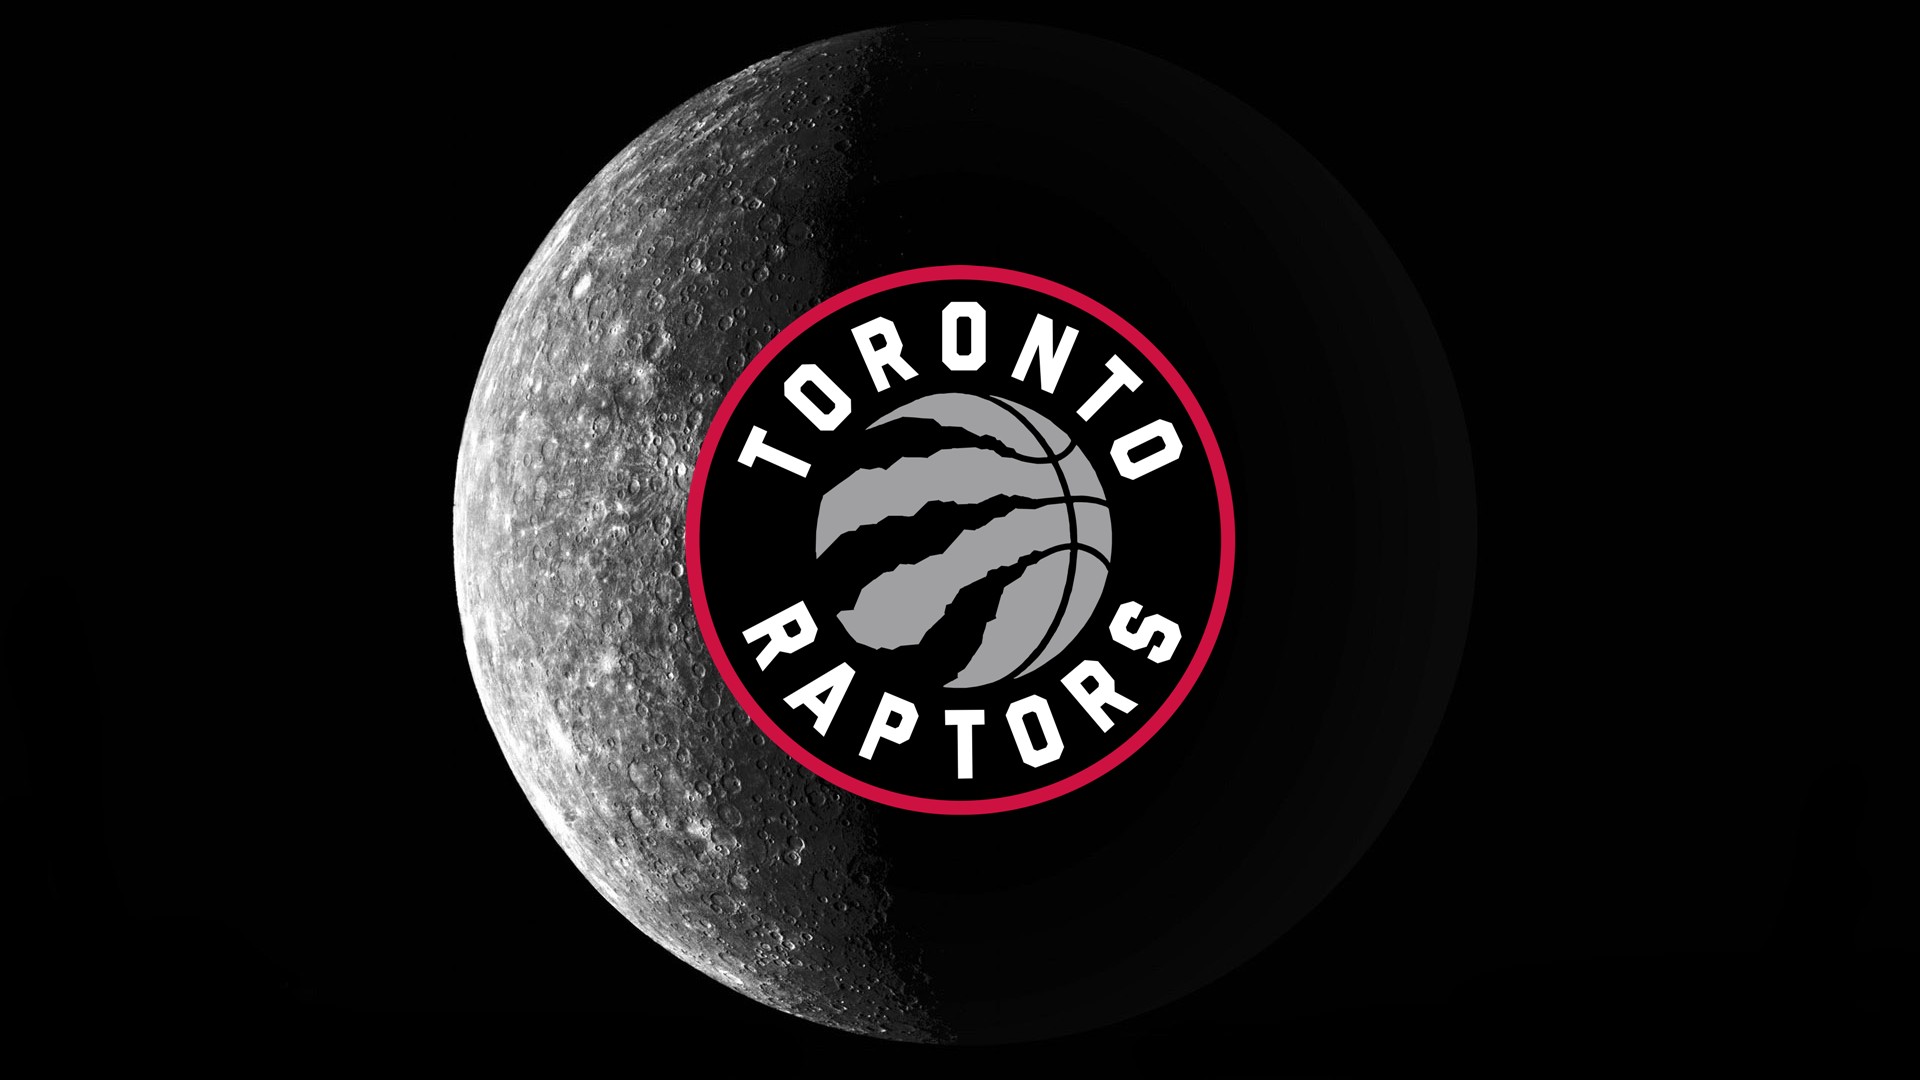 Raptors Basketball For Mac Wallpaper with image dimensions 1920x1080 pixel. You can make this wallpaper for your Desktop Computer Backgrounds, Windows or Mac Screensavers, iPhone Lock screen, Tablet or Android and another Mobile Phone device